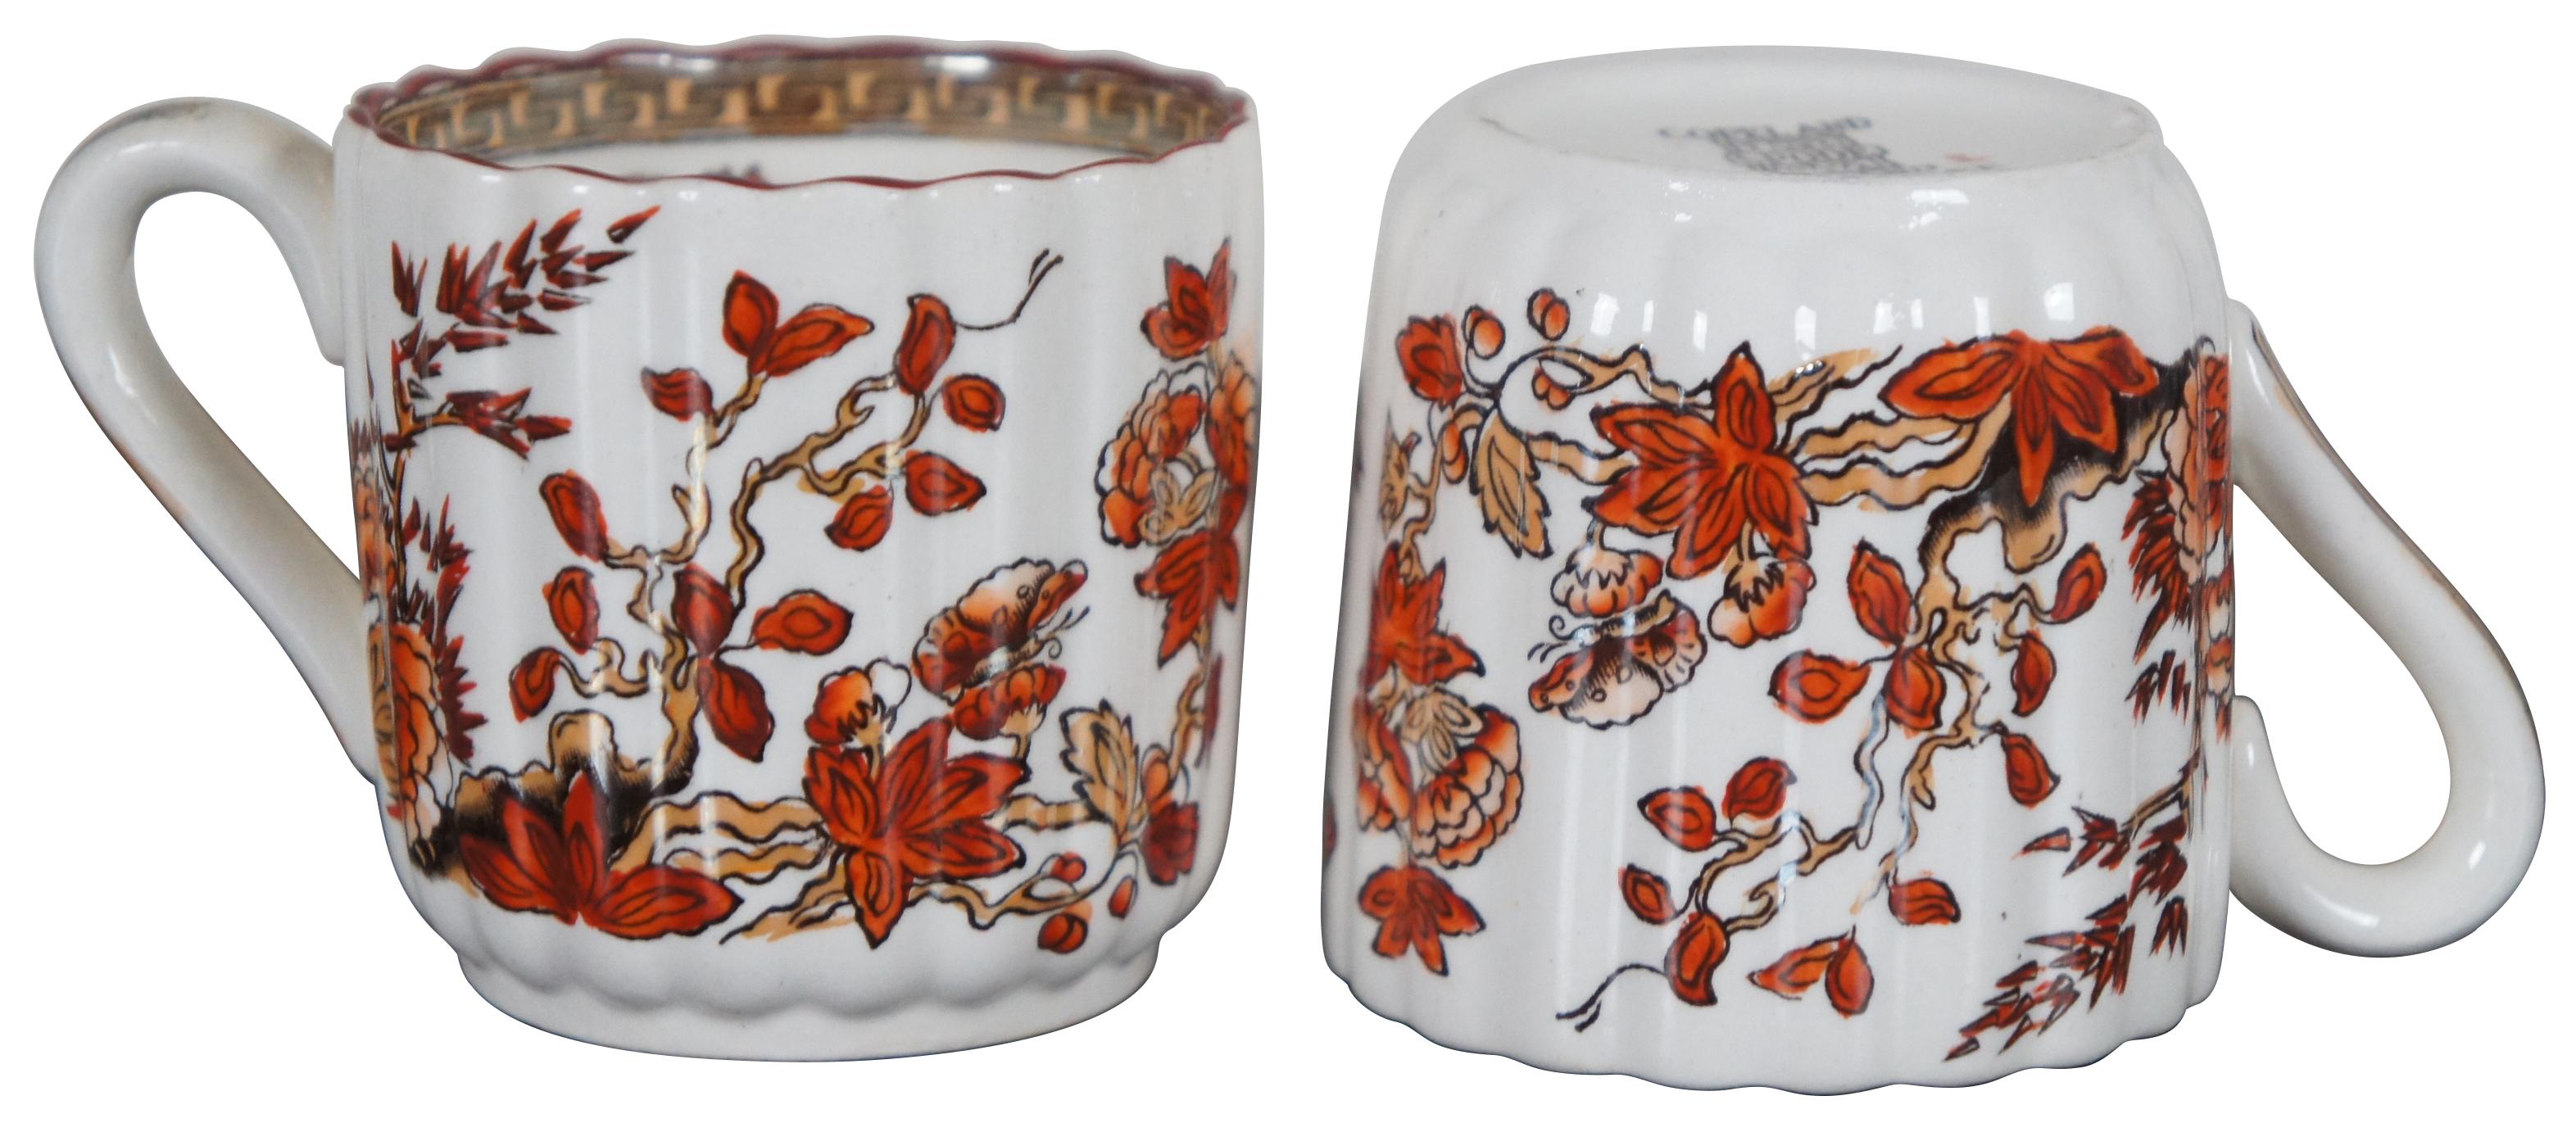 Set of twelve vintage Copeland Spode demitasse coffee cups in the India Tree pattern, featuring red-orange floral branches and Greek key accents.
       